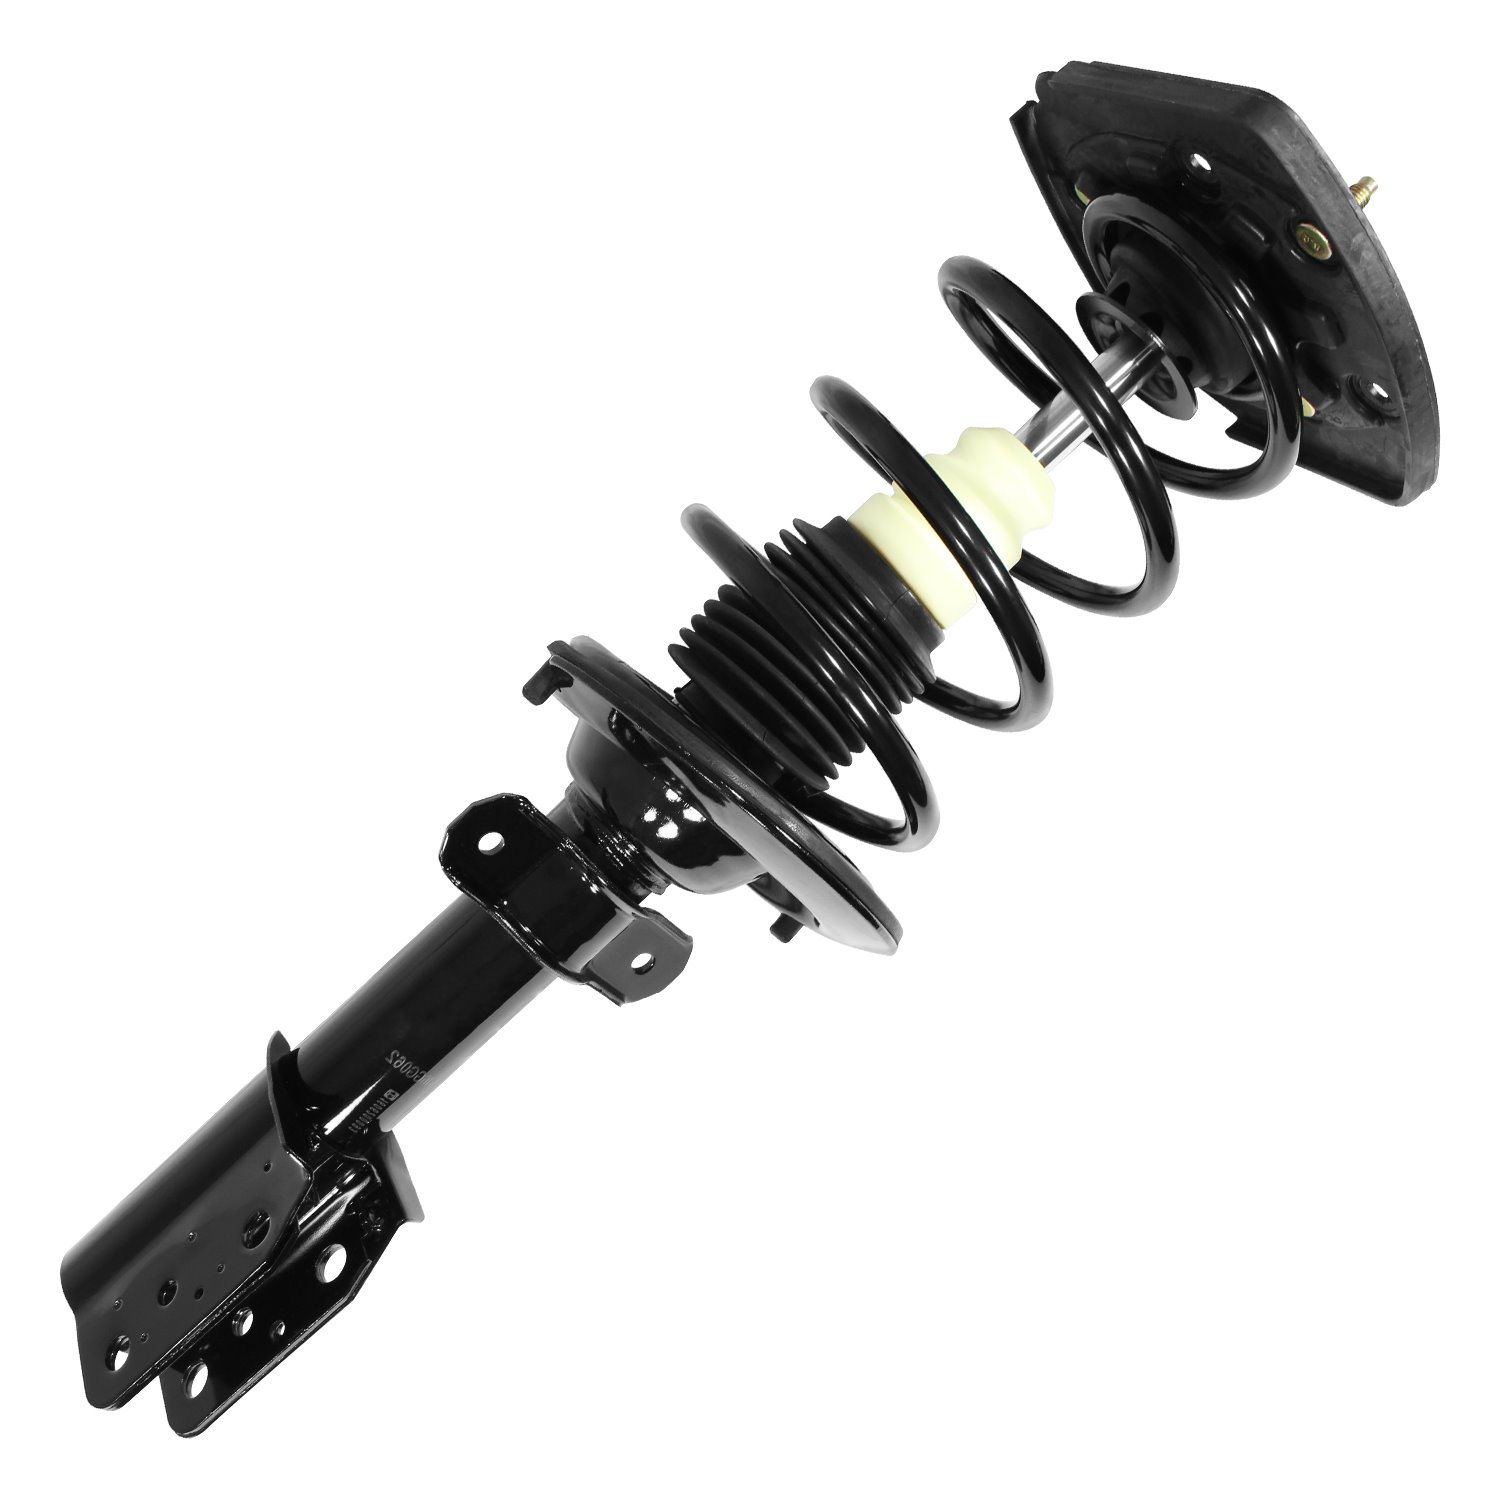 15061 Suspension Strut & Coil Spring Assembly Fits Select Chevy Impala, Chevy Monte Carlo, Oldsmobile Intrigue